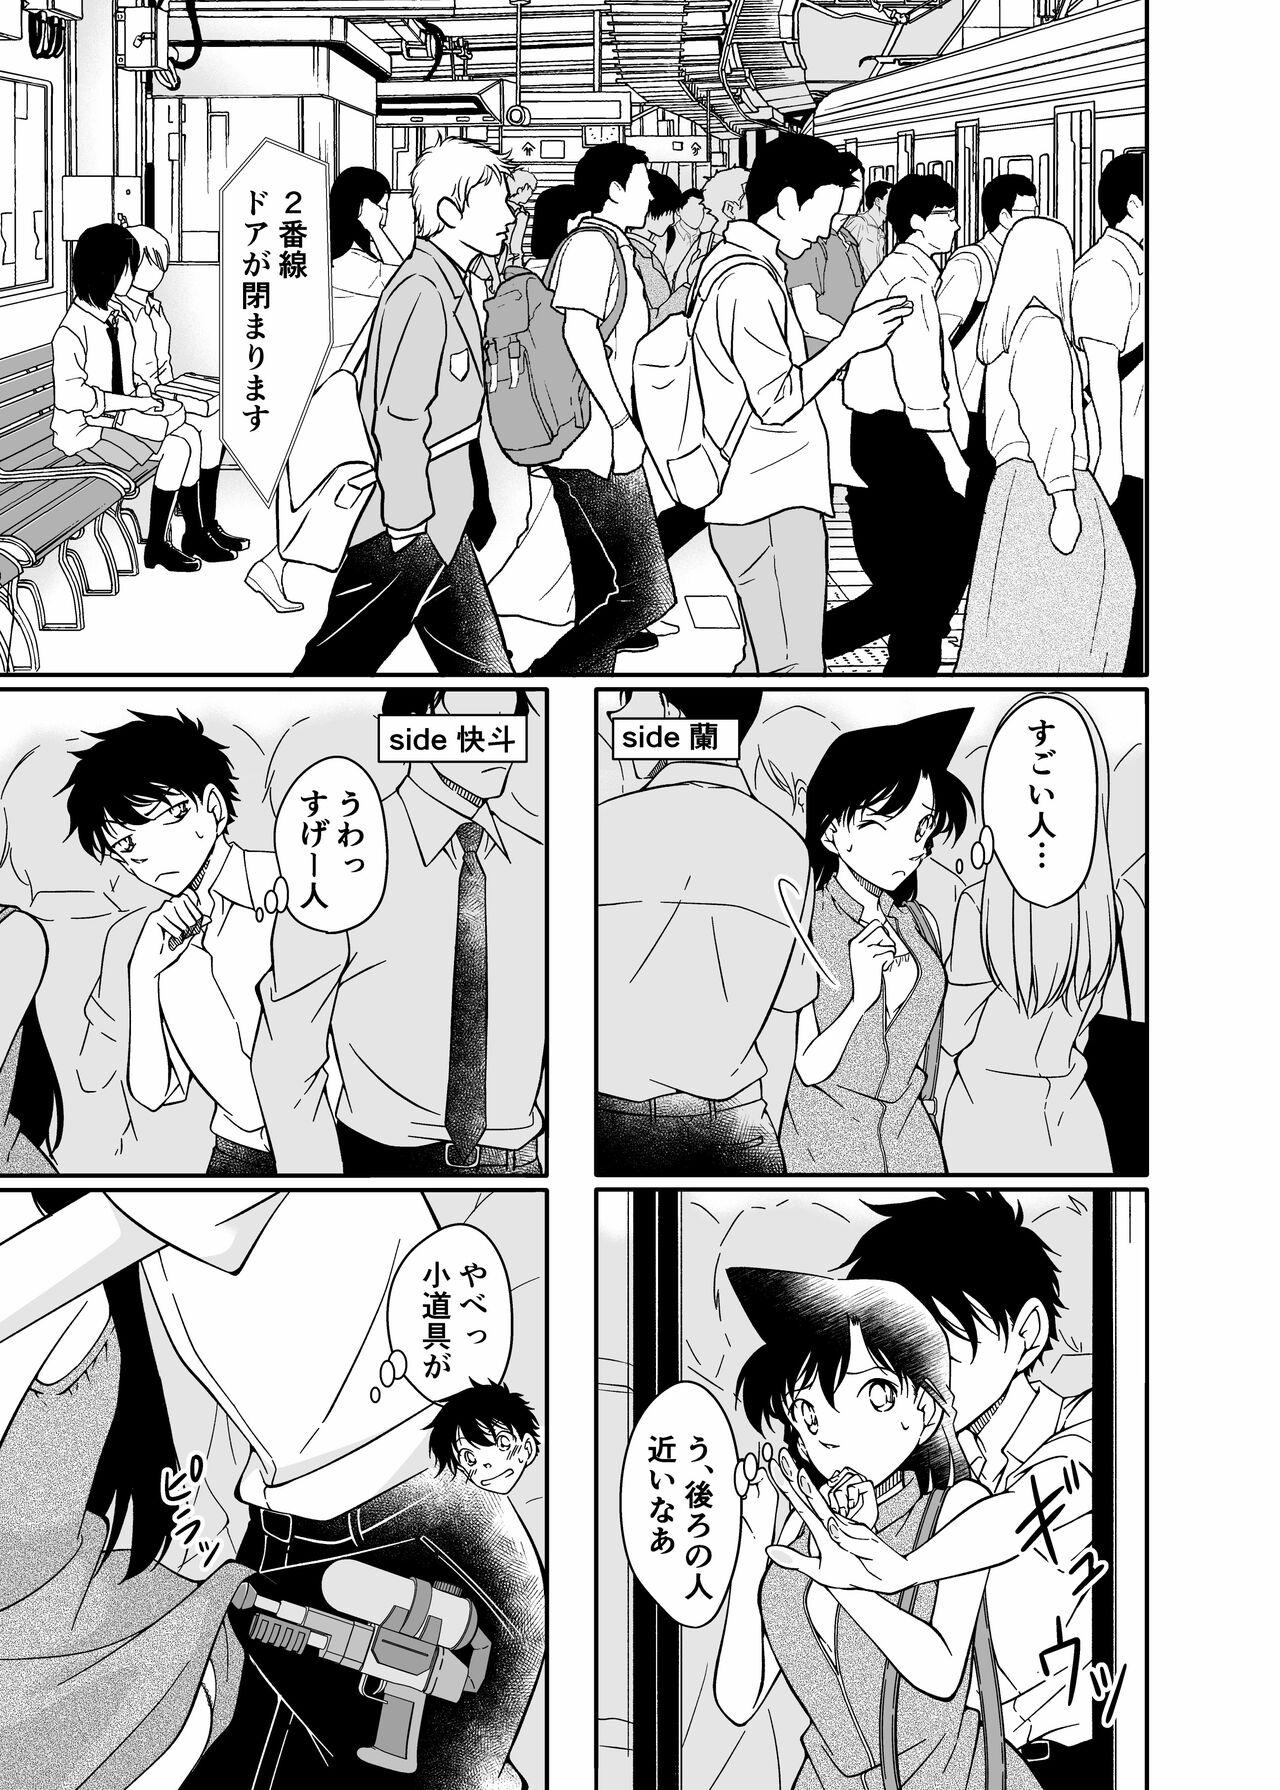 Facefuck Mischief in a crowded train - Detective conan | meitantei conan Big Pussy - Page 2